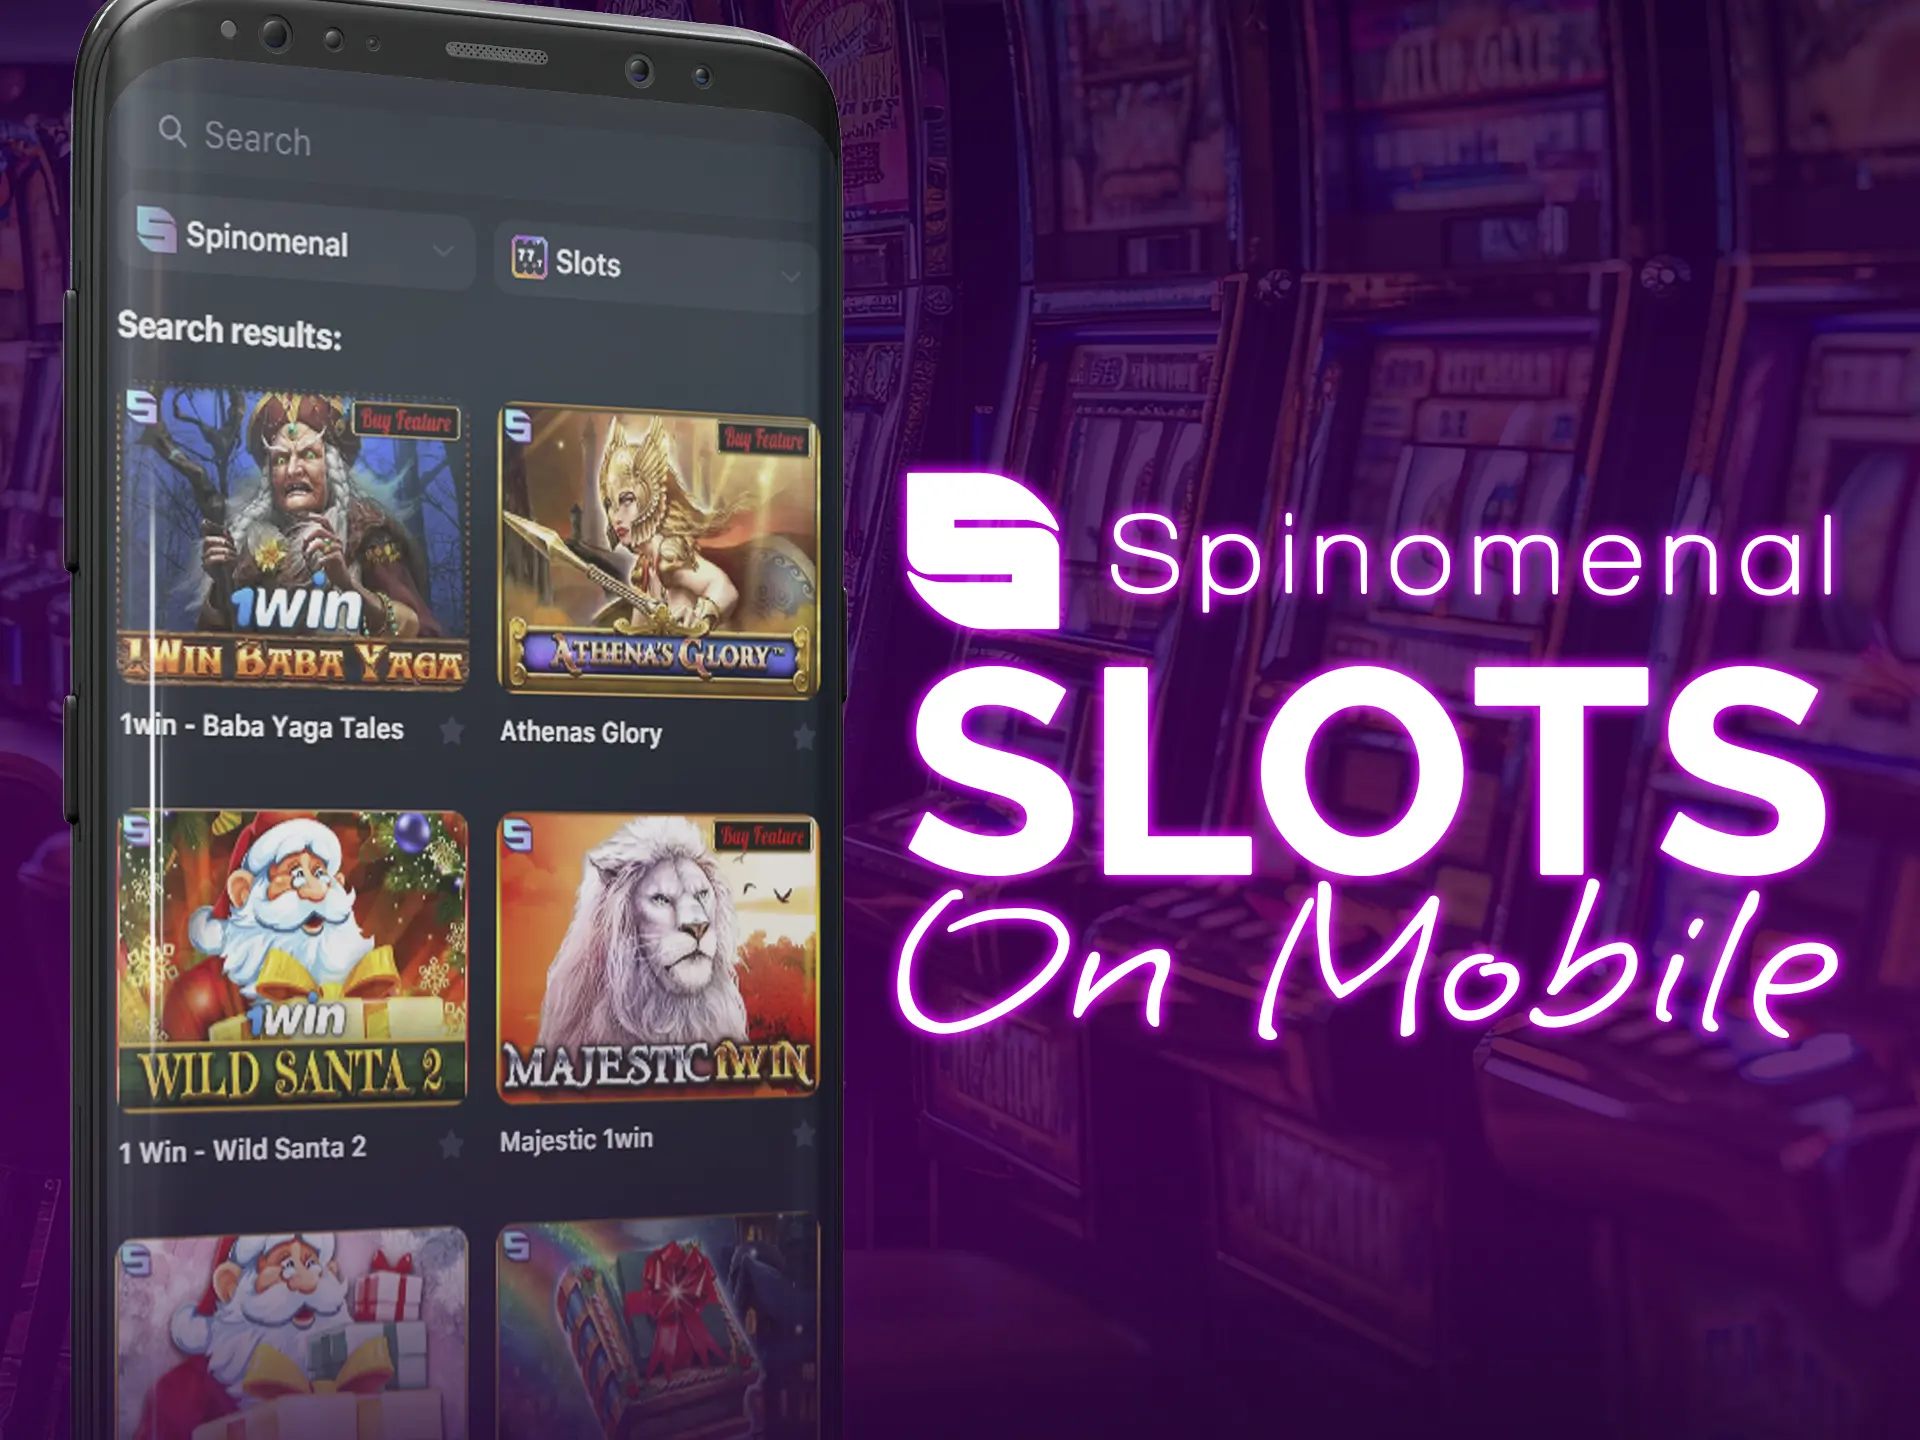 Discover Spinomenal slots RTP on mobile with HTML5, providing seamless smartphone betting.